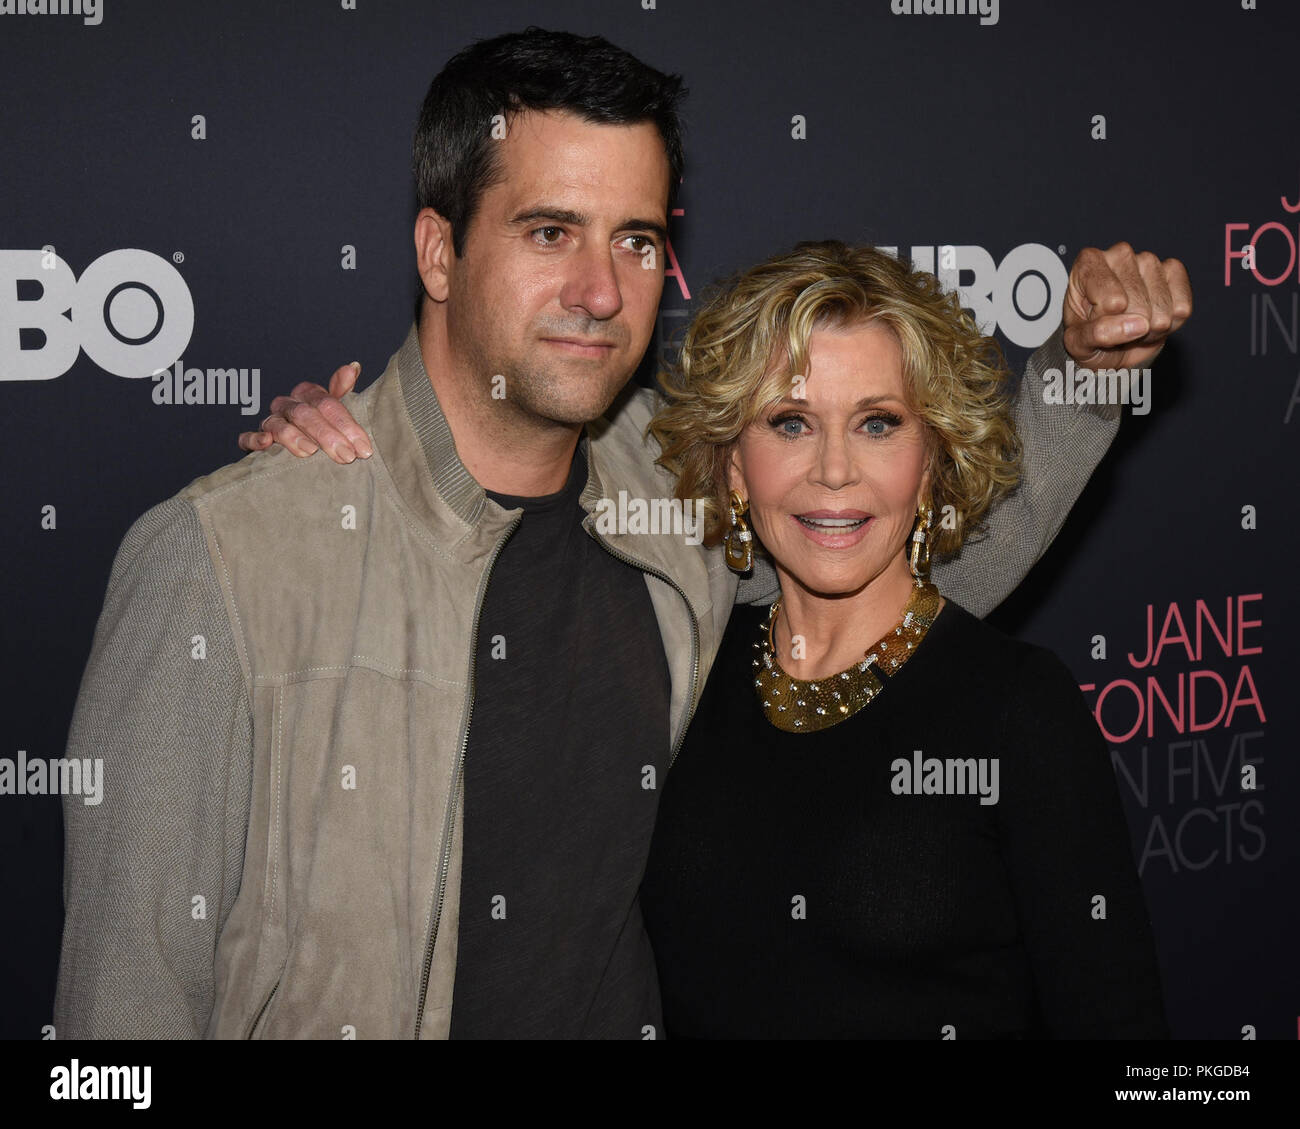 Westwood Village, USA. 13th Sep, 2018. Troy Garity and Jane Fonda attends the Los Angeles premiere of HBO's 'Jane Fonda in Five Acts' at the Hammer Museum in Westwood Village, California on September 13, 2018. Credit: The Photo Access/Alamy Live News Stock Photo